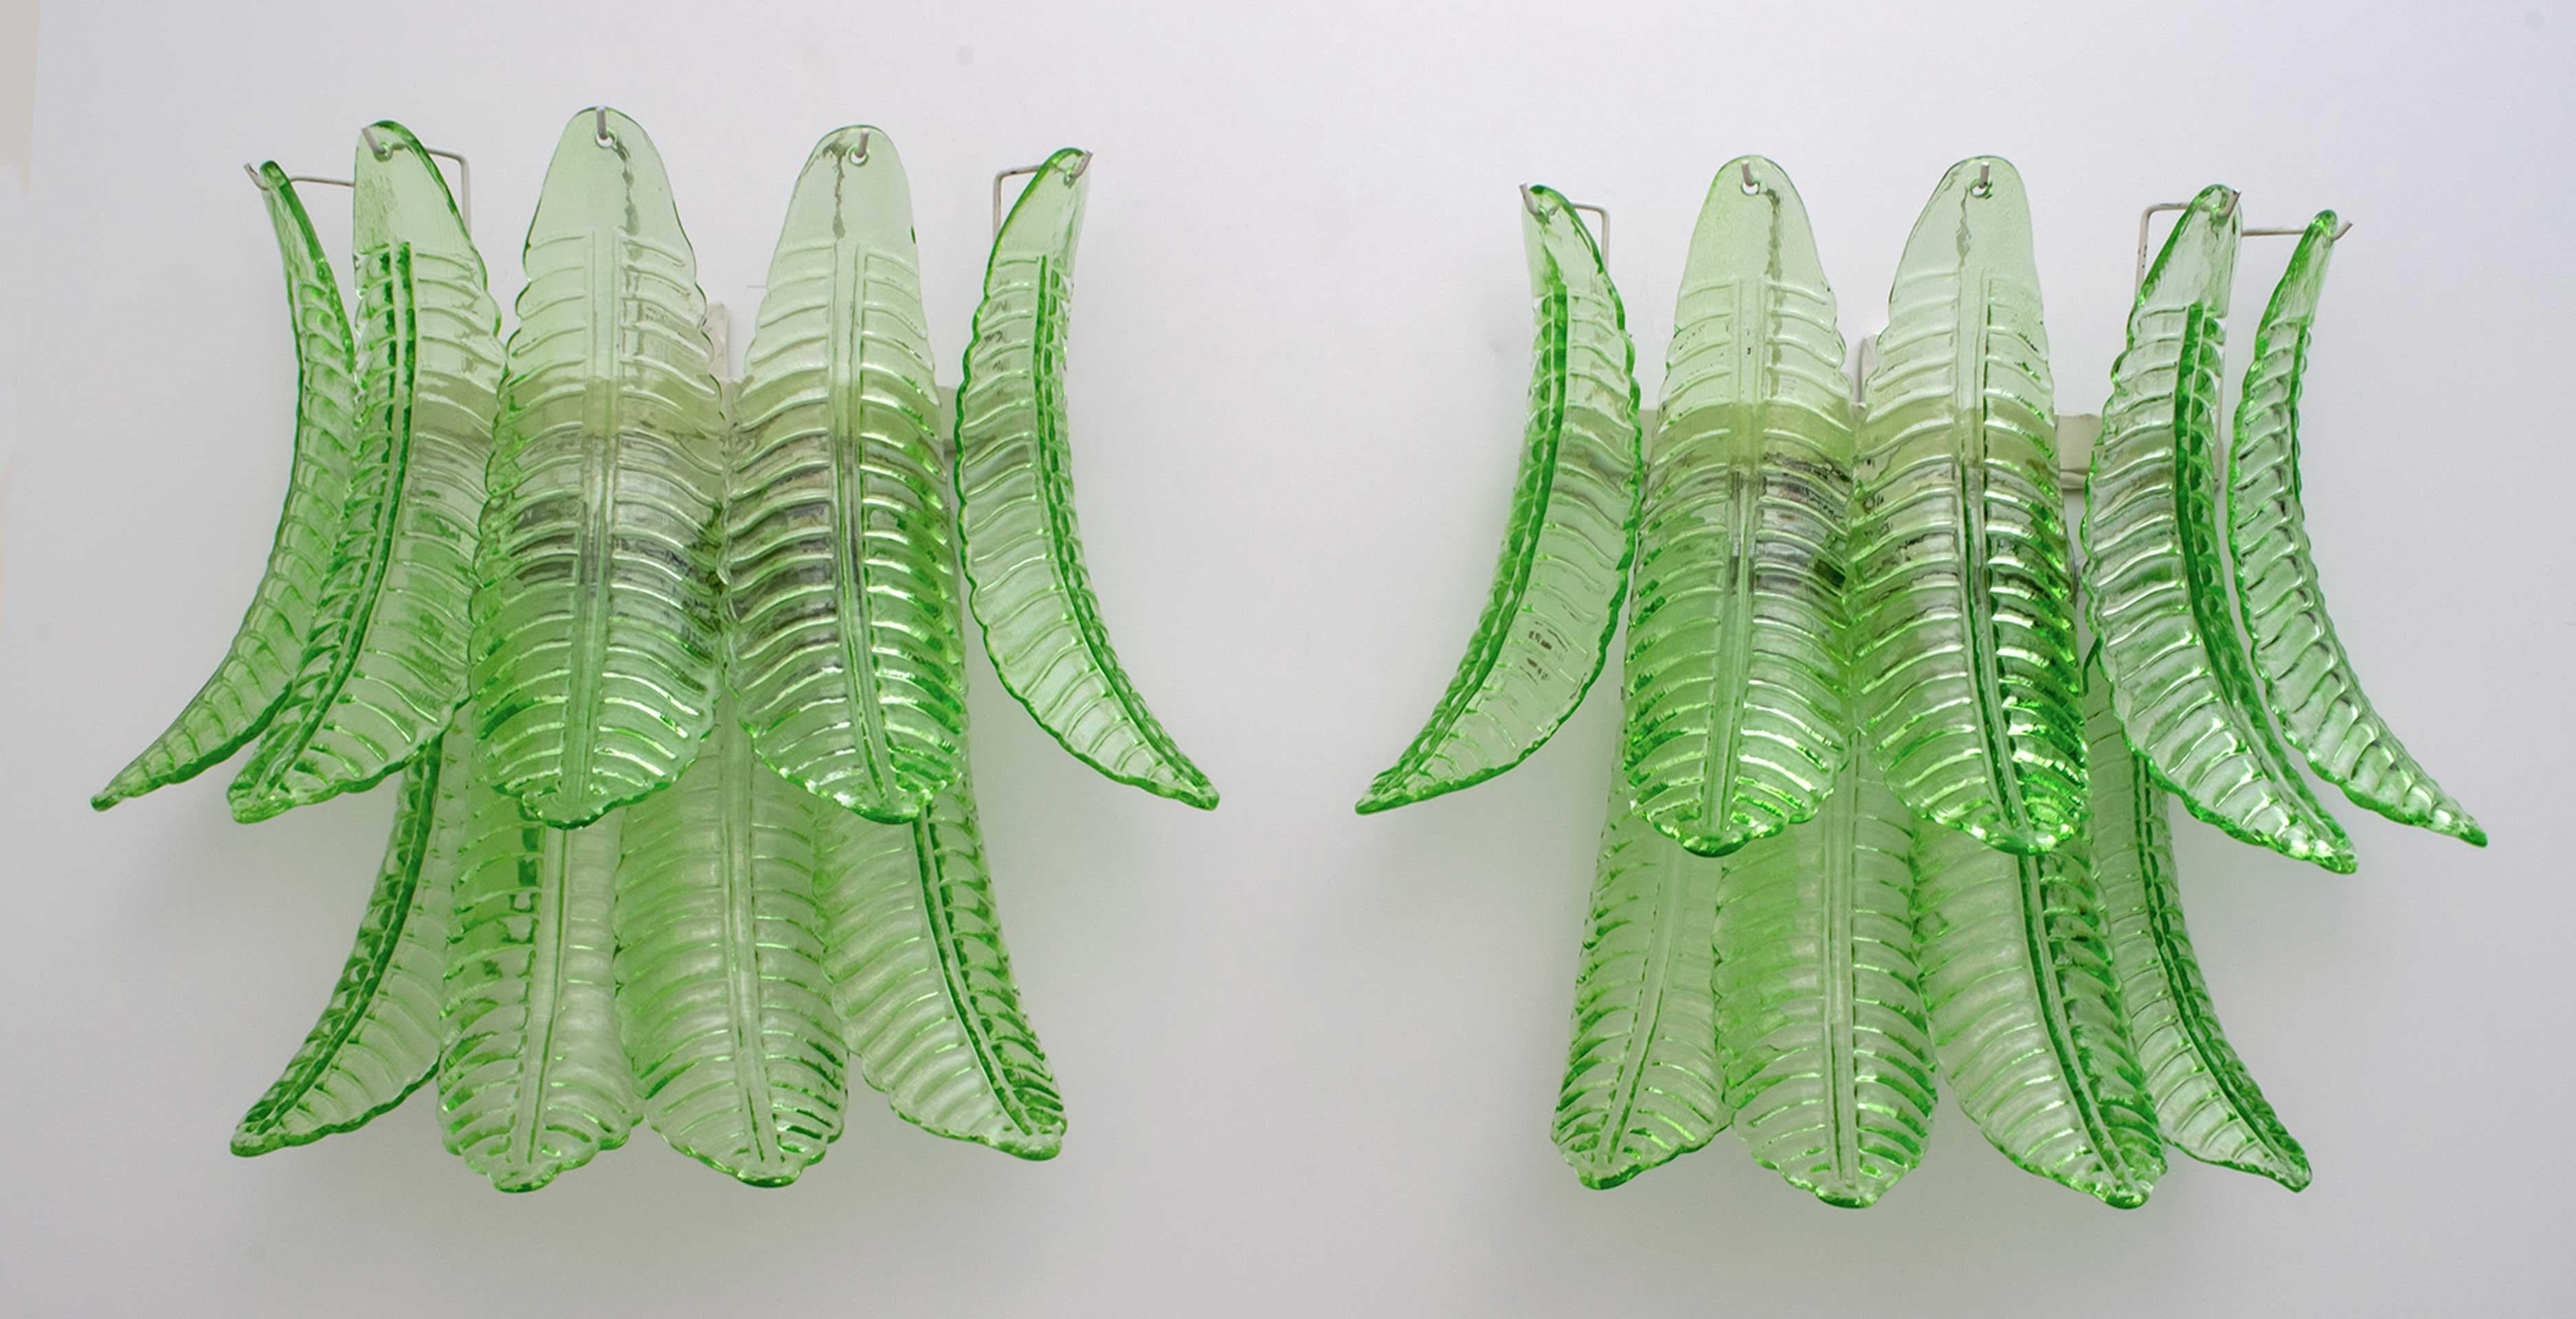 Pair of Mid-Century Modern Italian Murano Glass Palm Leaf Sconces, 1970s For Sale 2